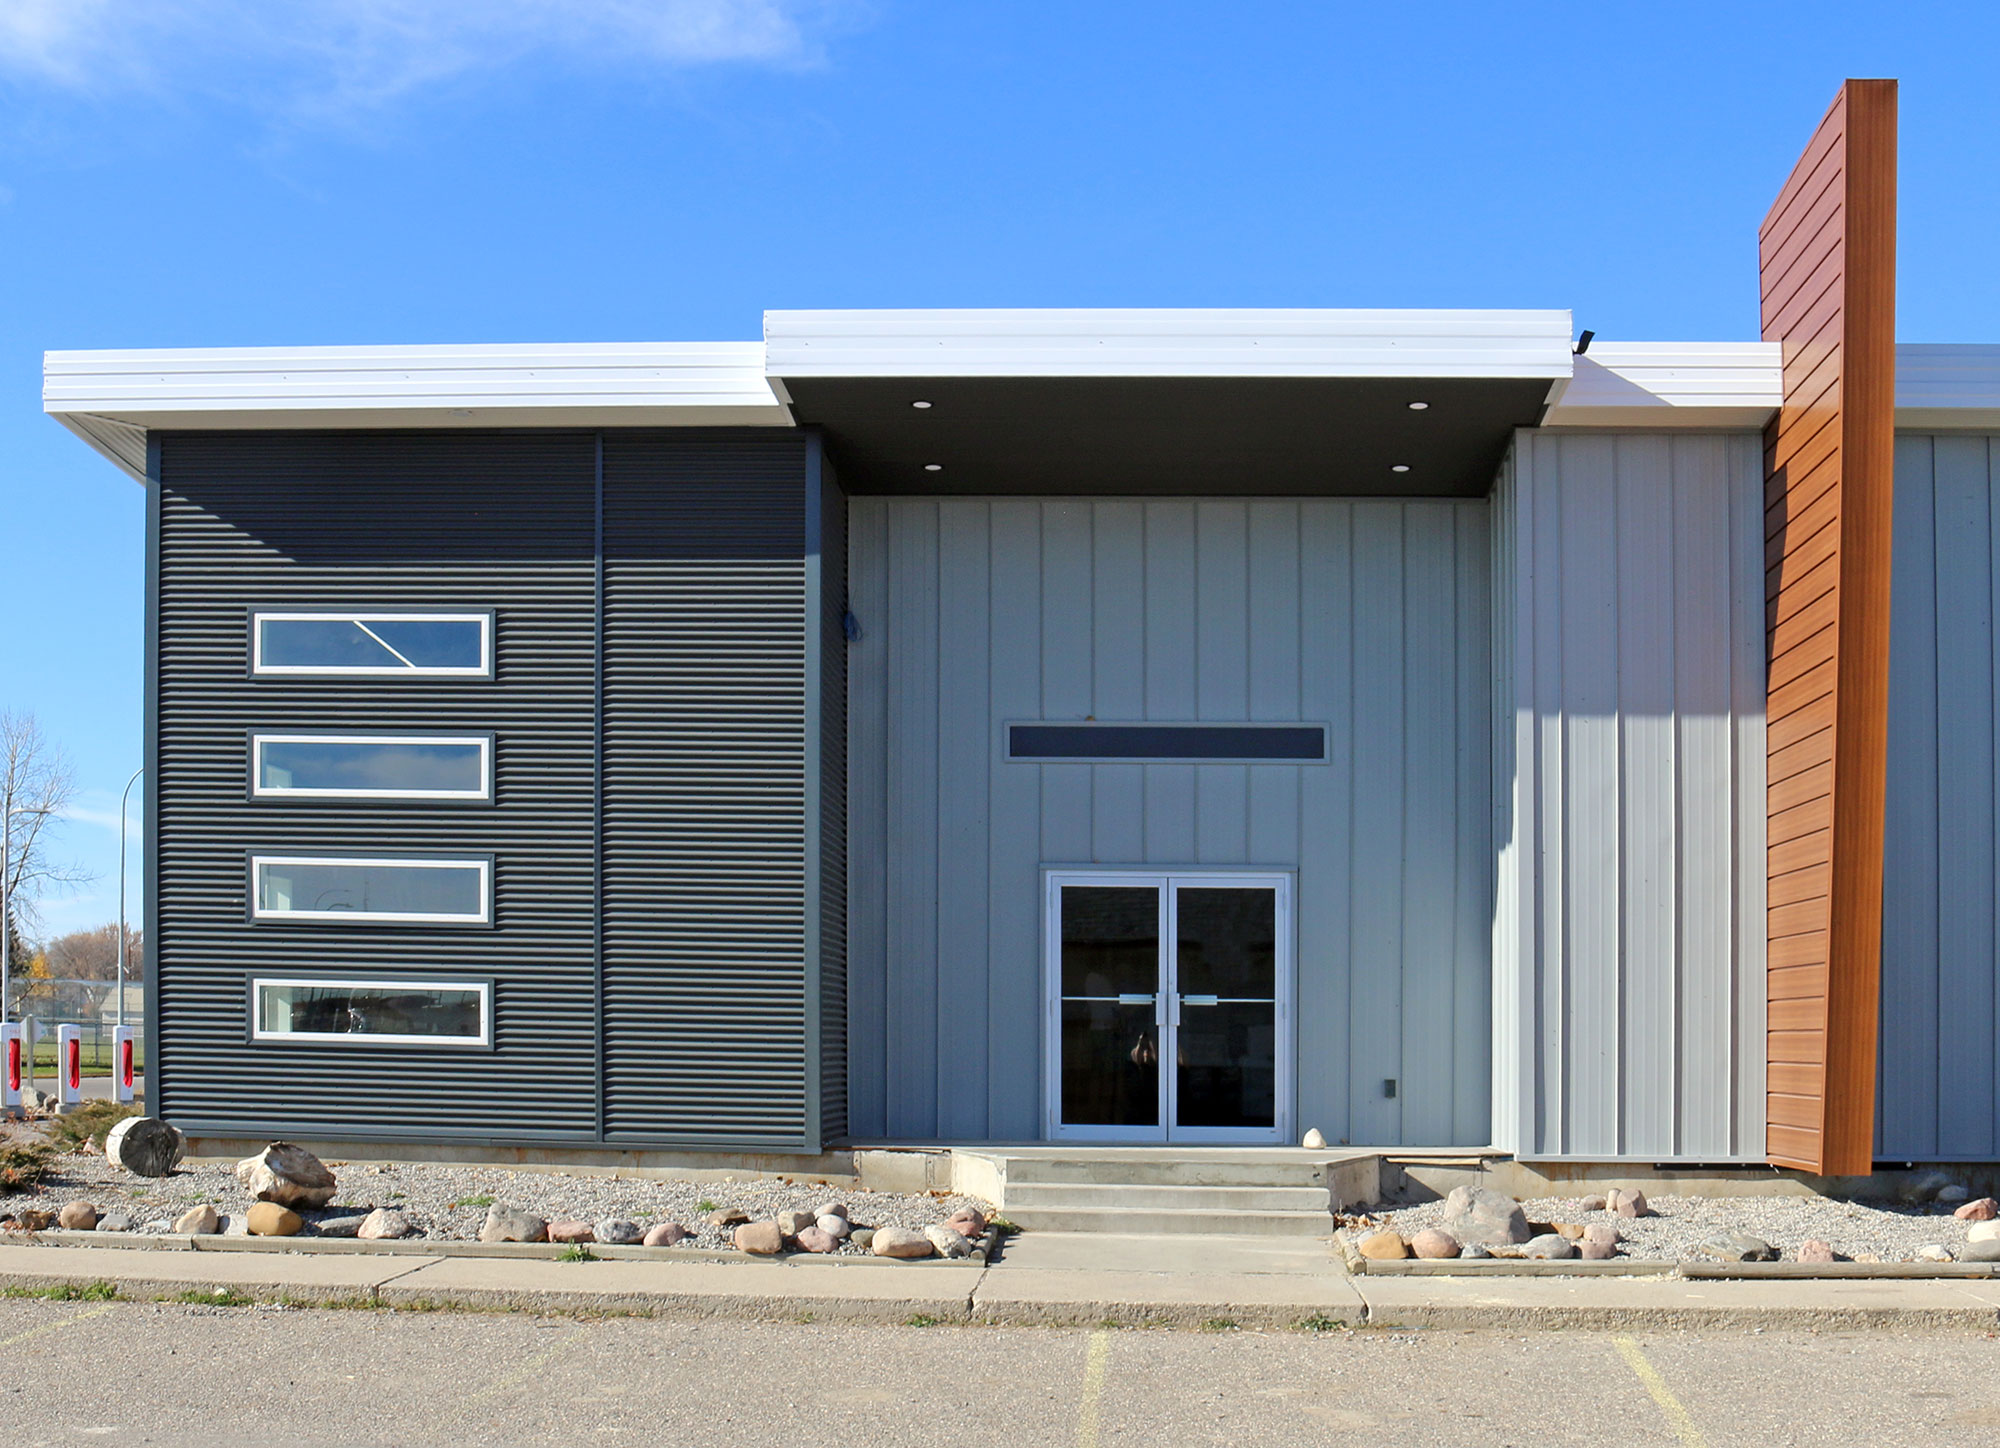 Retail StoreFront featuring Regent Grey Forma Loc Standing Seam Panel, Matte Anthracite 7/8 Corrugated Siding and Espresso Woodgrain Forma Plank Accent